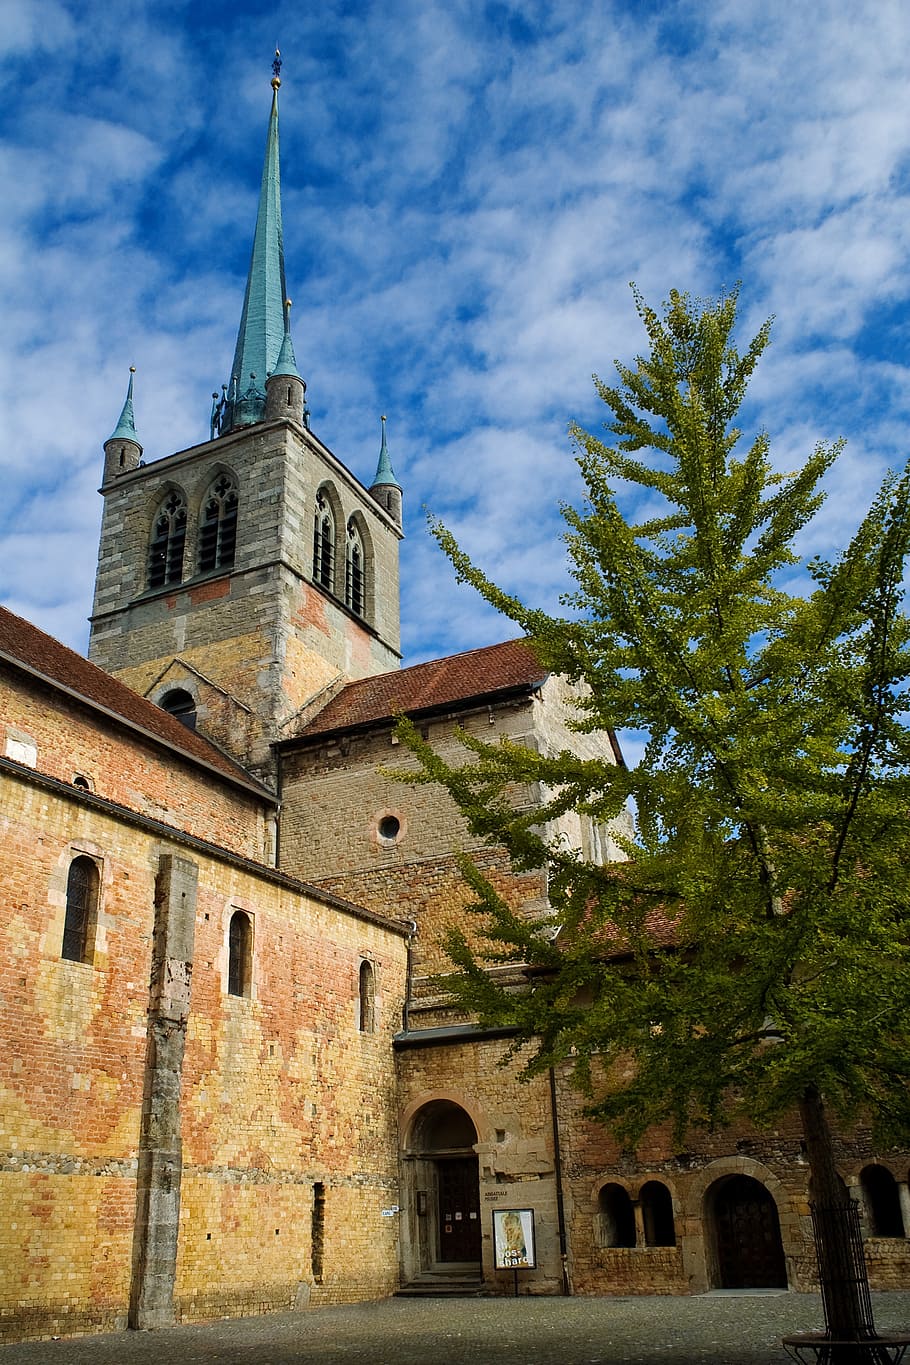 church, payerne, romanesque, switzerland, abbey, old, architecture, middle ages, sky, built structure